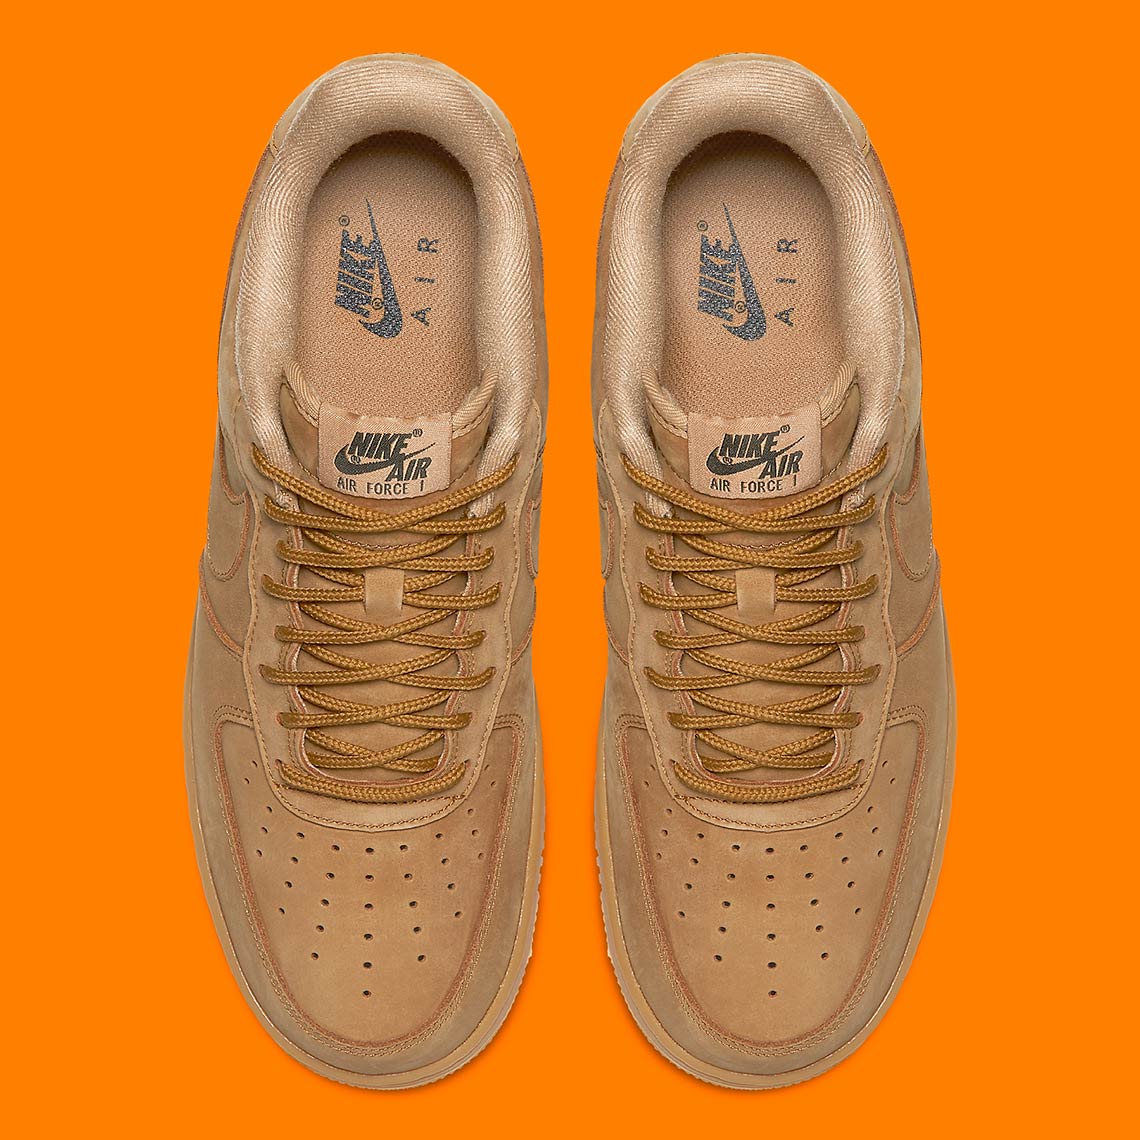 Nike Air Force 1 Low Flax AA4061-200 Release Date | SneakerNews.com1140 x 1140